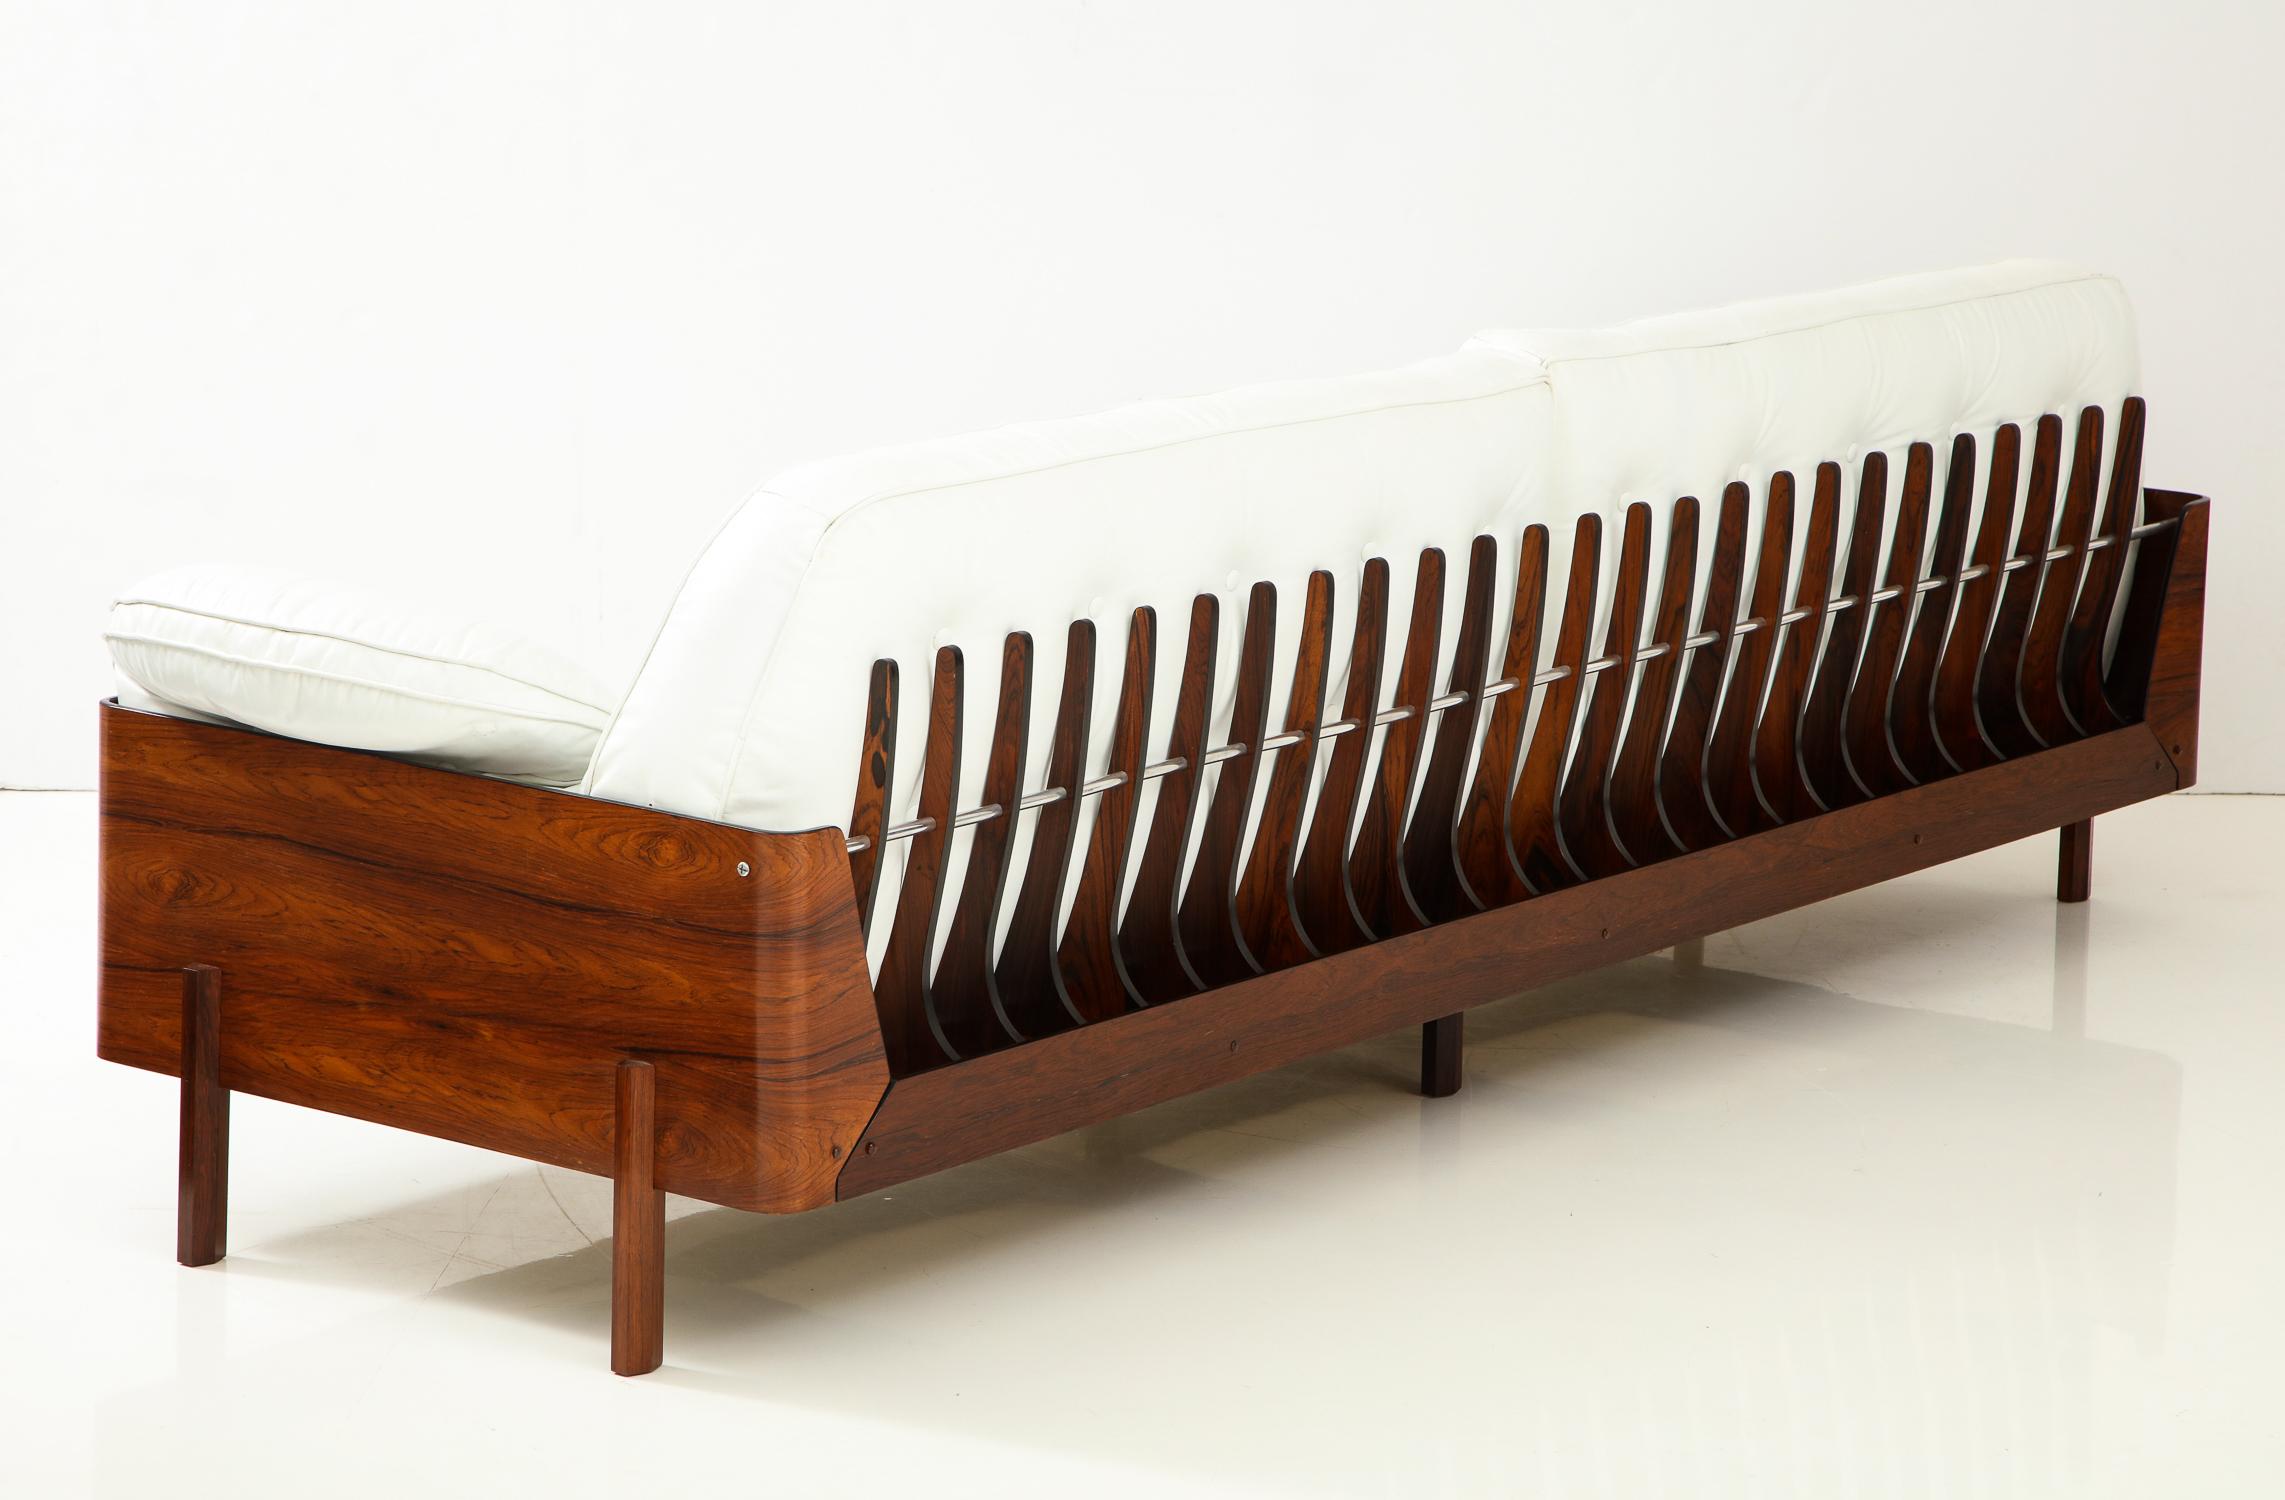 Eight foot long sofa in beautifully figured Jacaranda wood with a series of skeletal fins along the back connected with an aluminum rod, and original white leather cushions. A visually impressive design made in Sao Paulo, Brazil, circa 1965. A rare